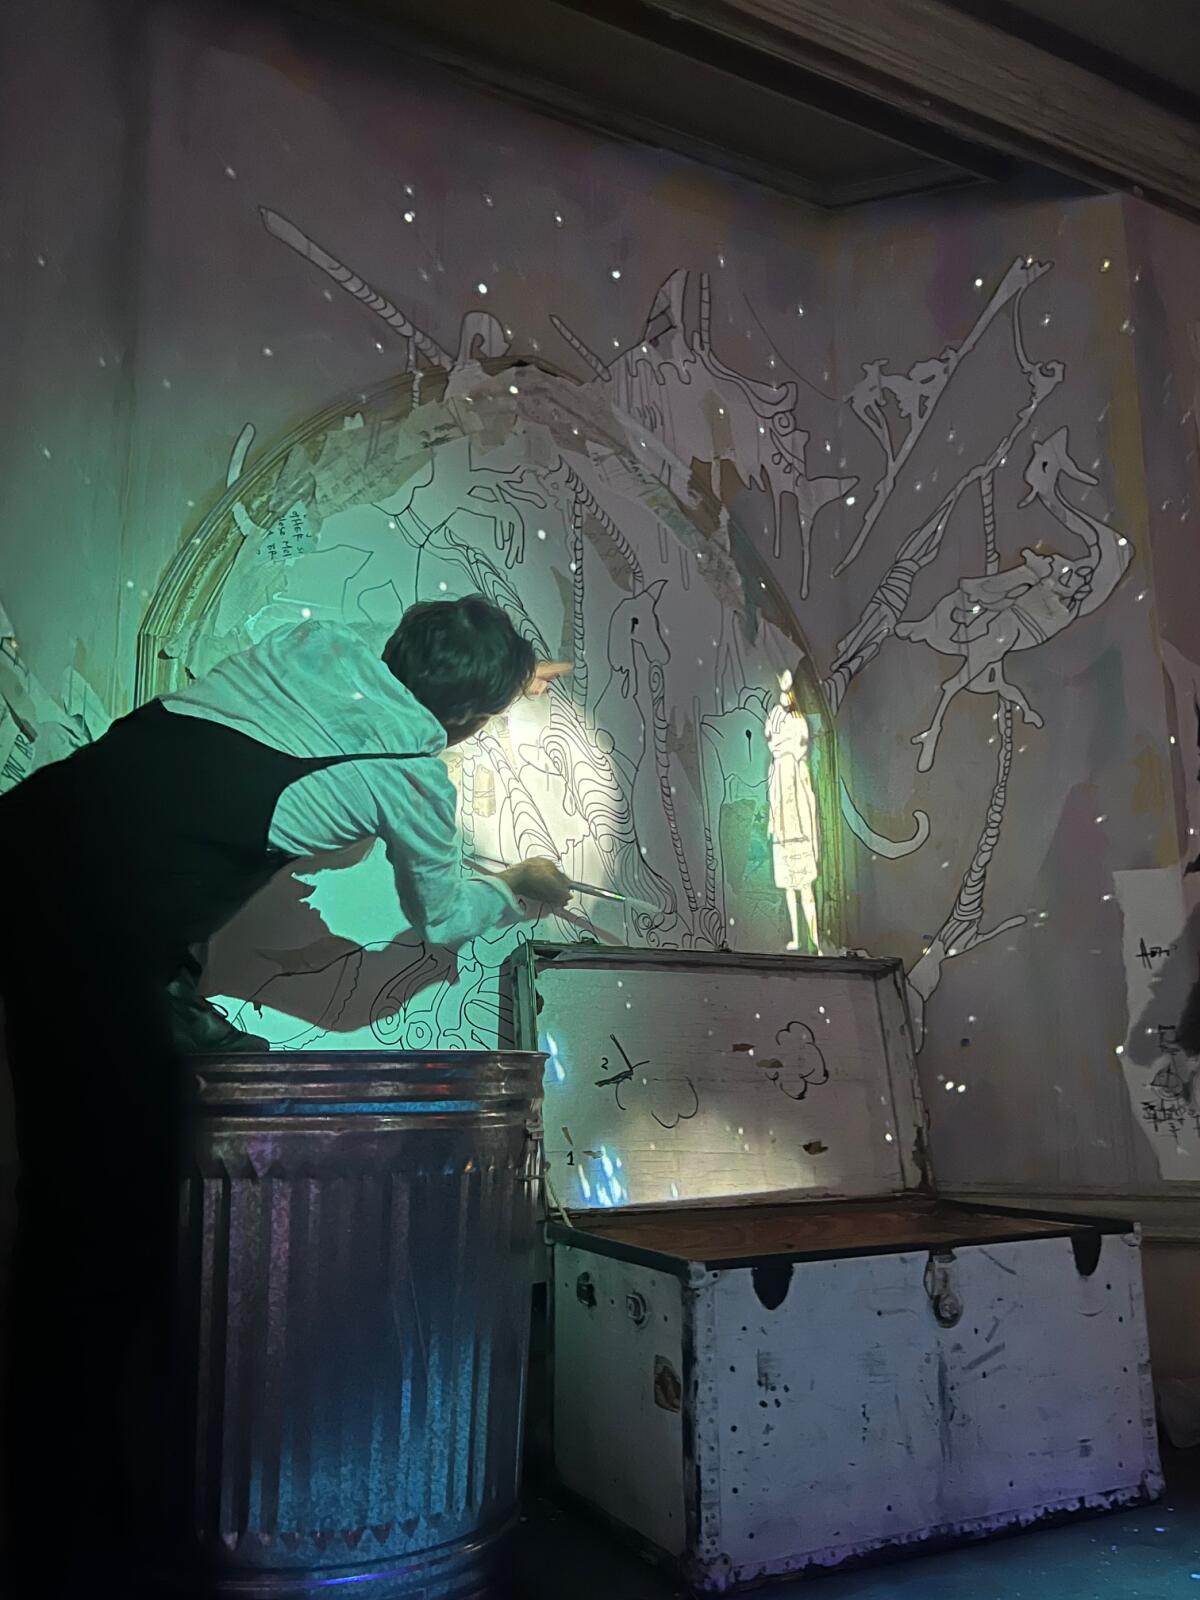 An actor appears to draw on a wall with a wand, where an animated figure appears. 